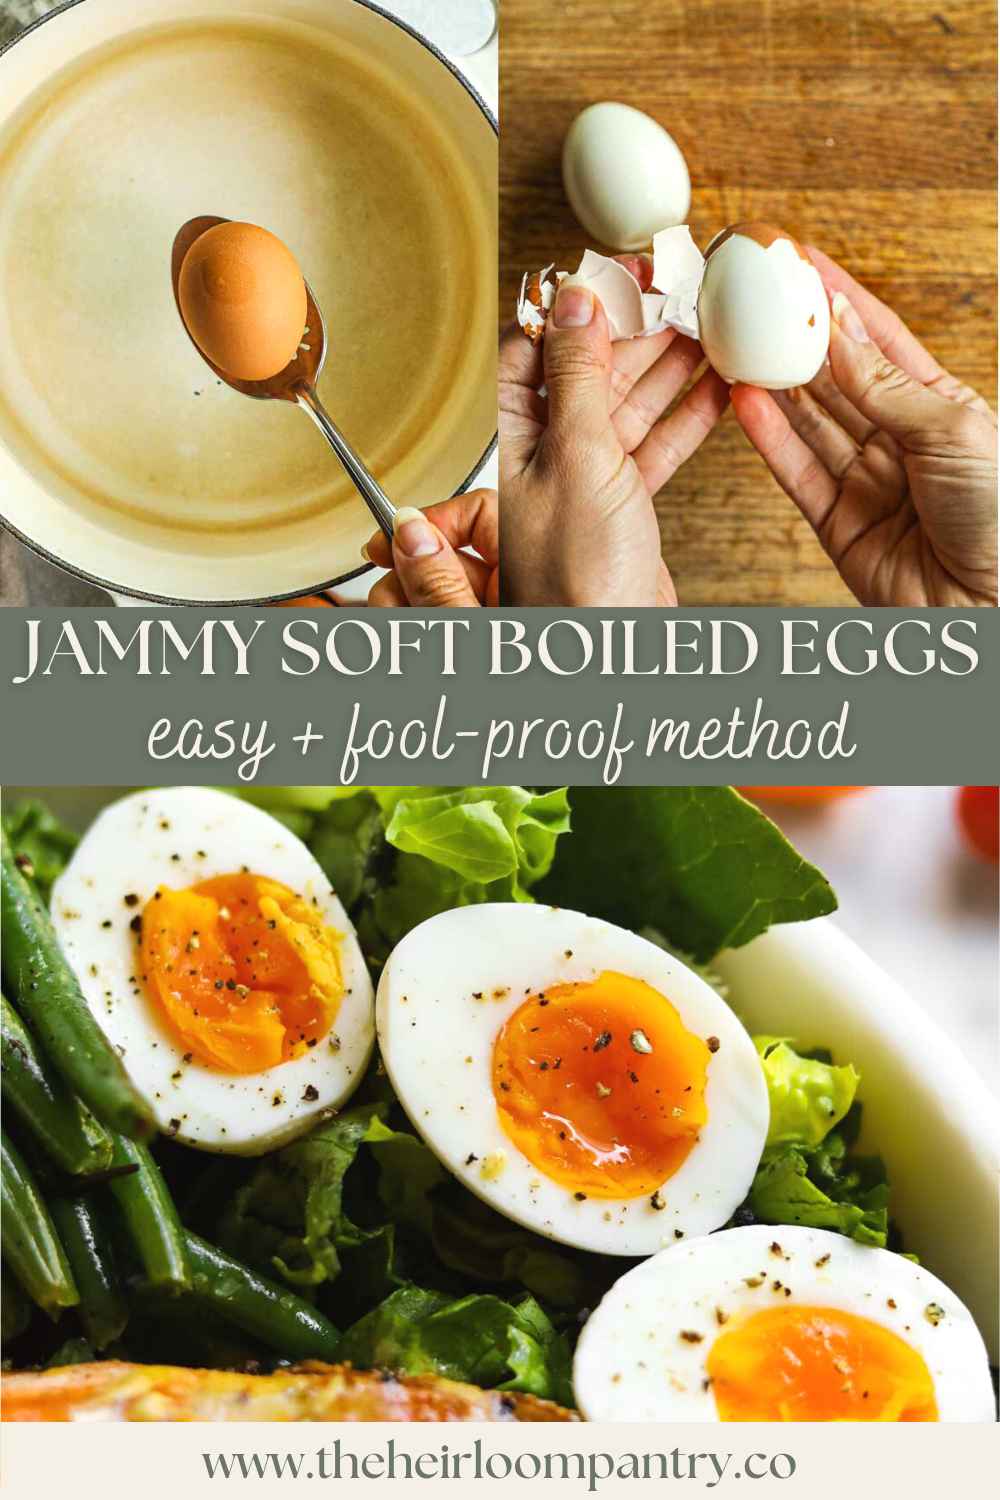 Perfect fool-proof soft boiled egg Pinterest pin.